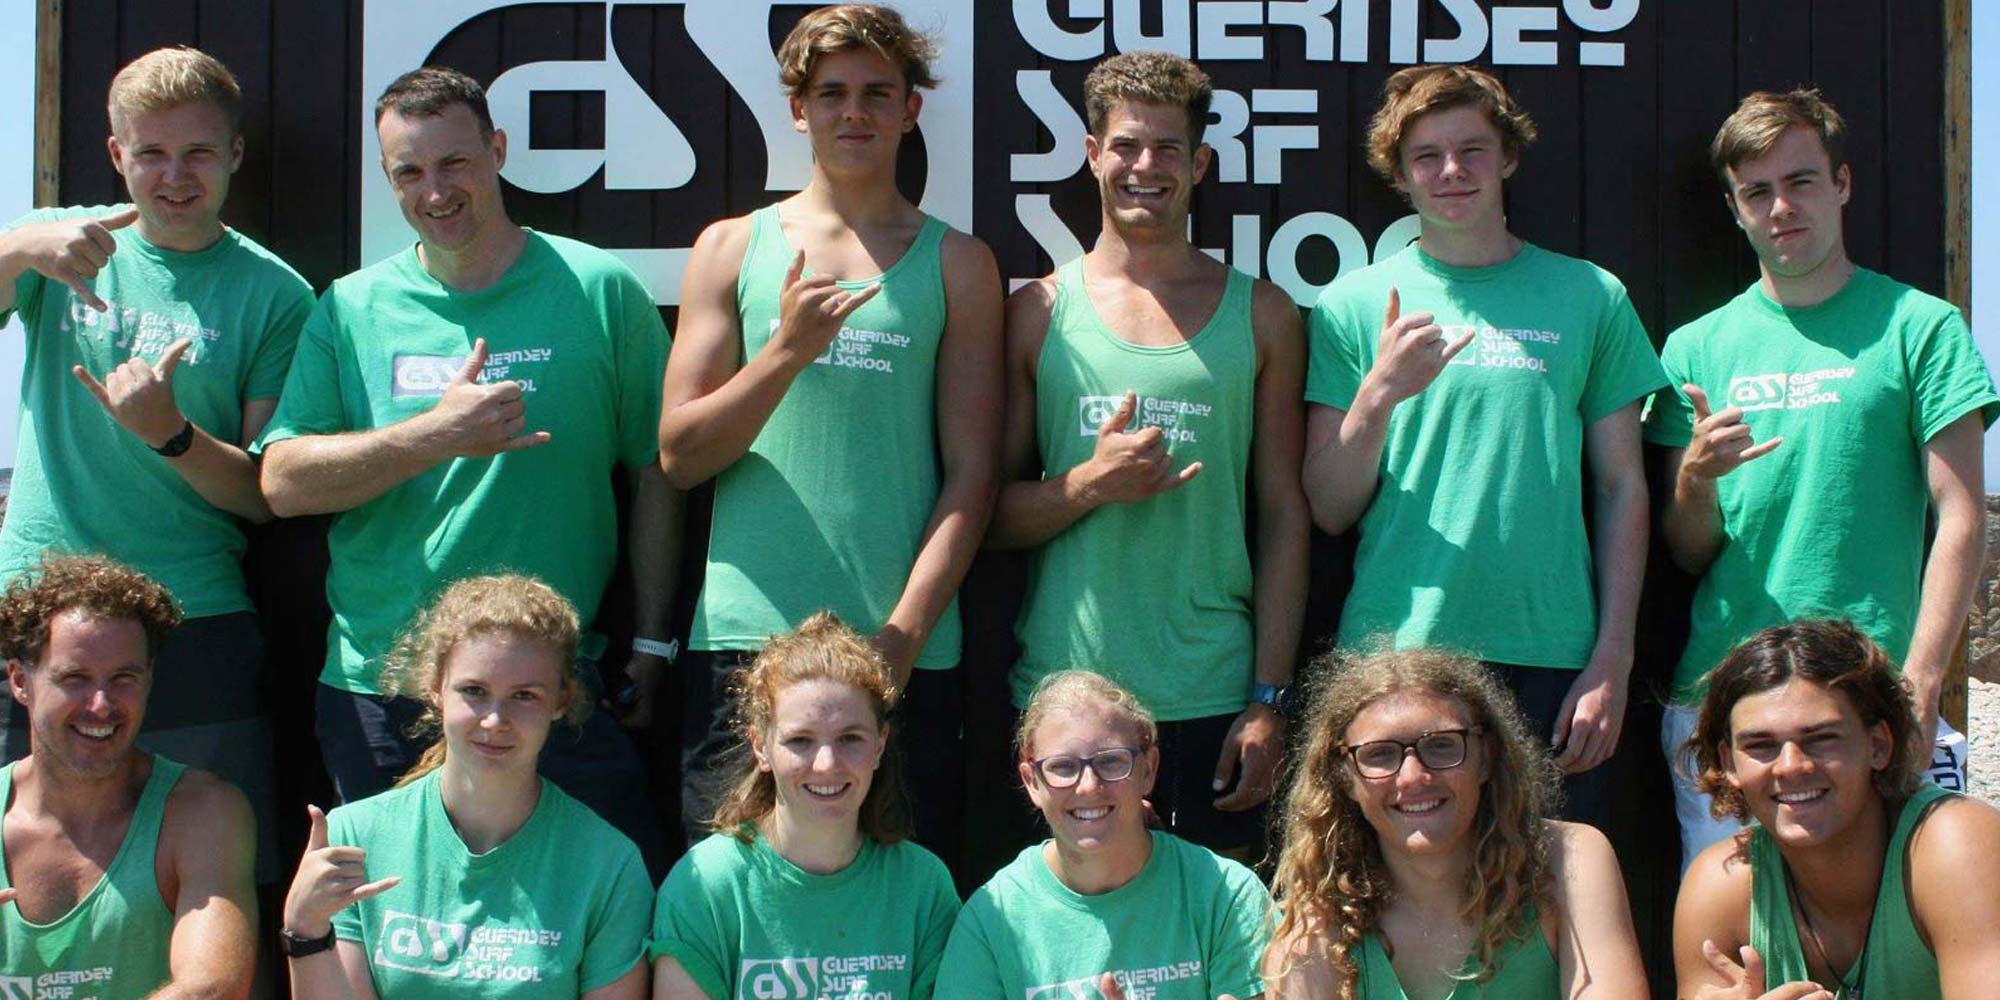 want to work for the Guernsey Surf School? We want to hear from you - join our awesome team today!